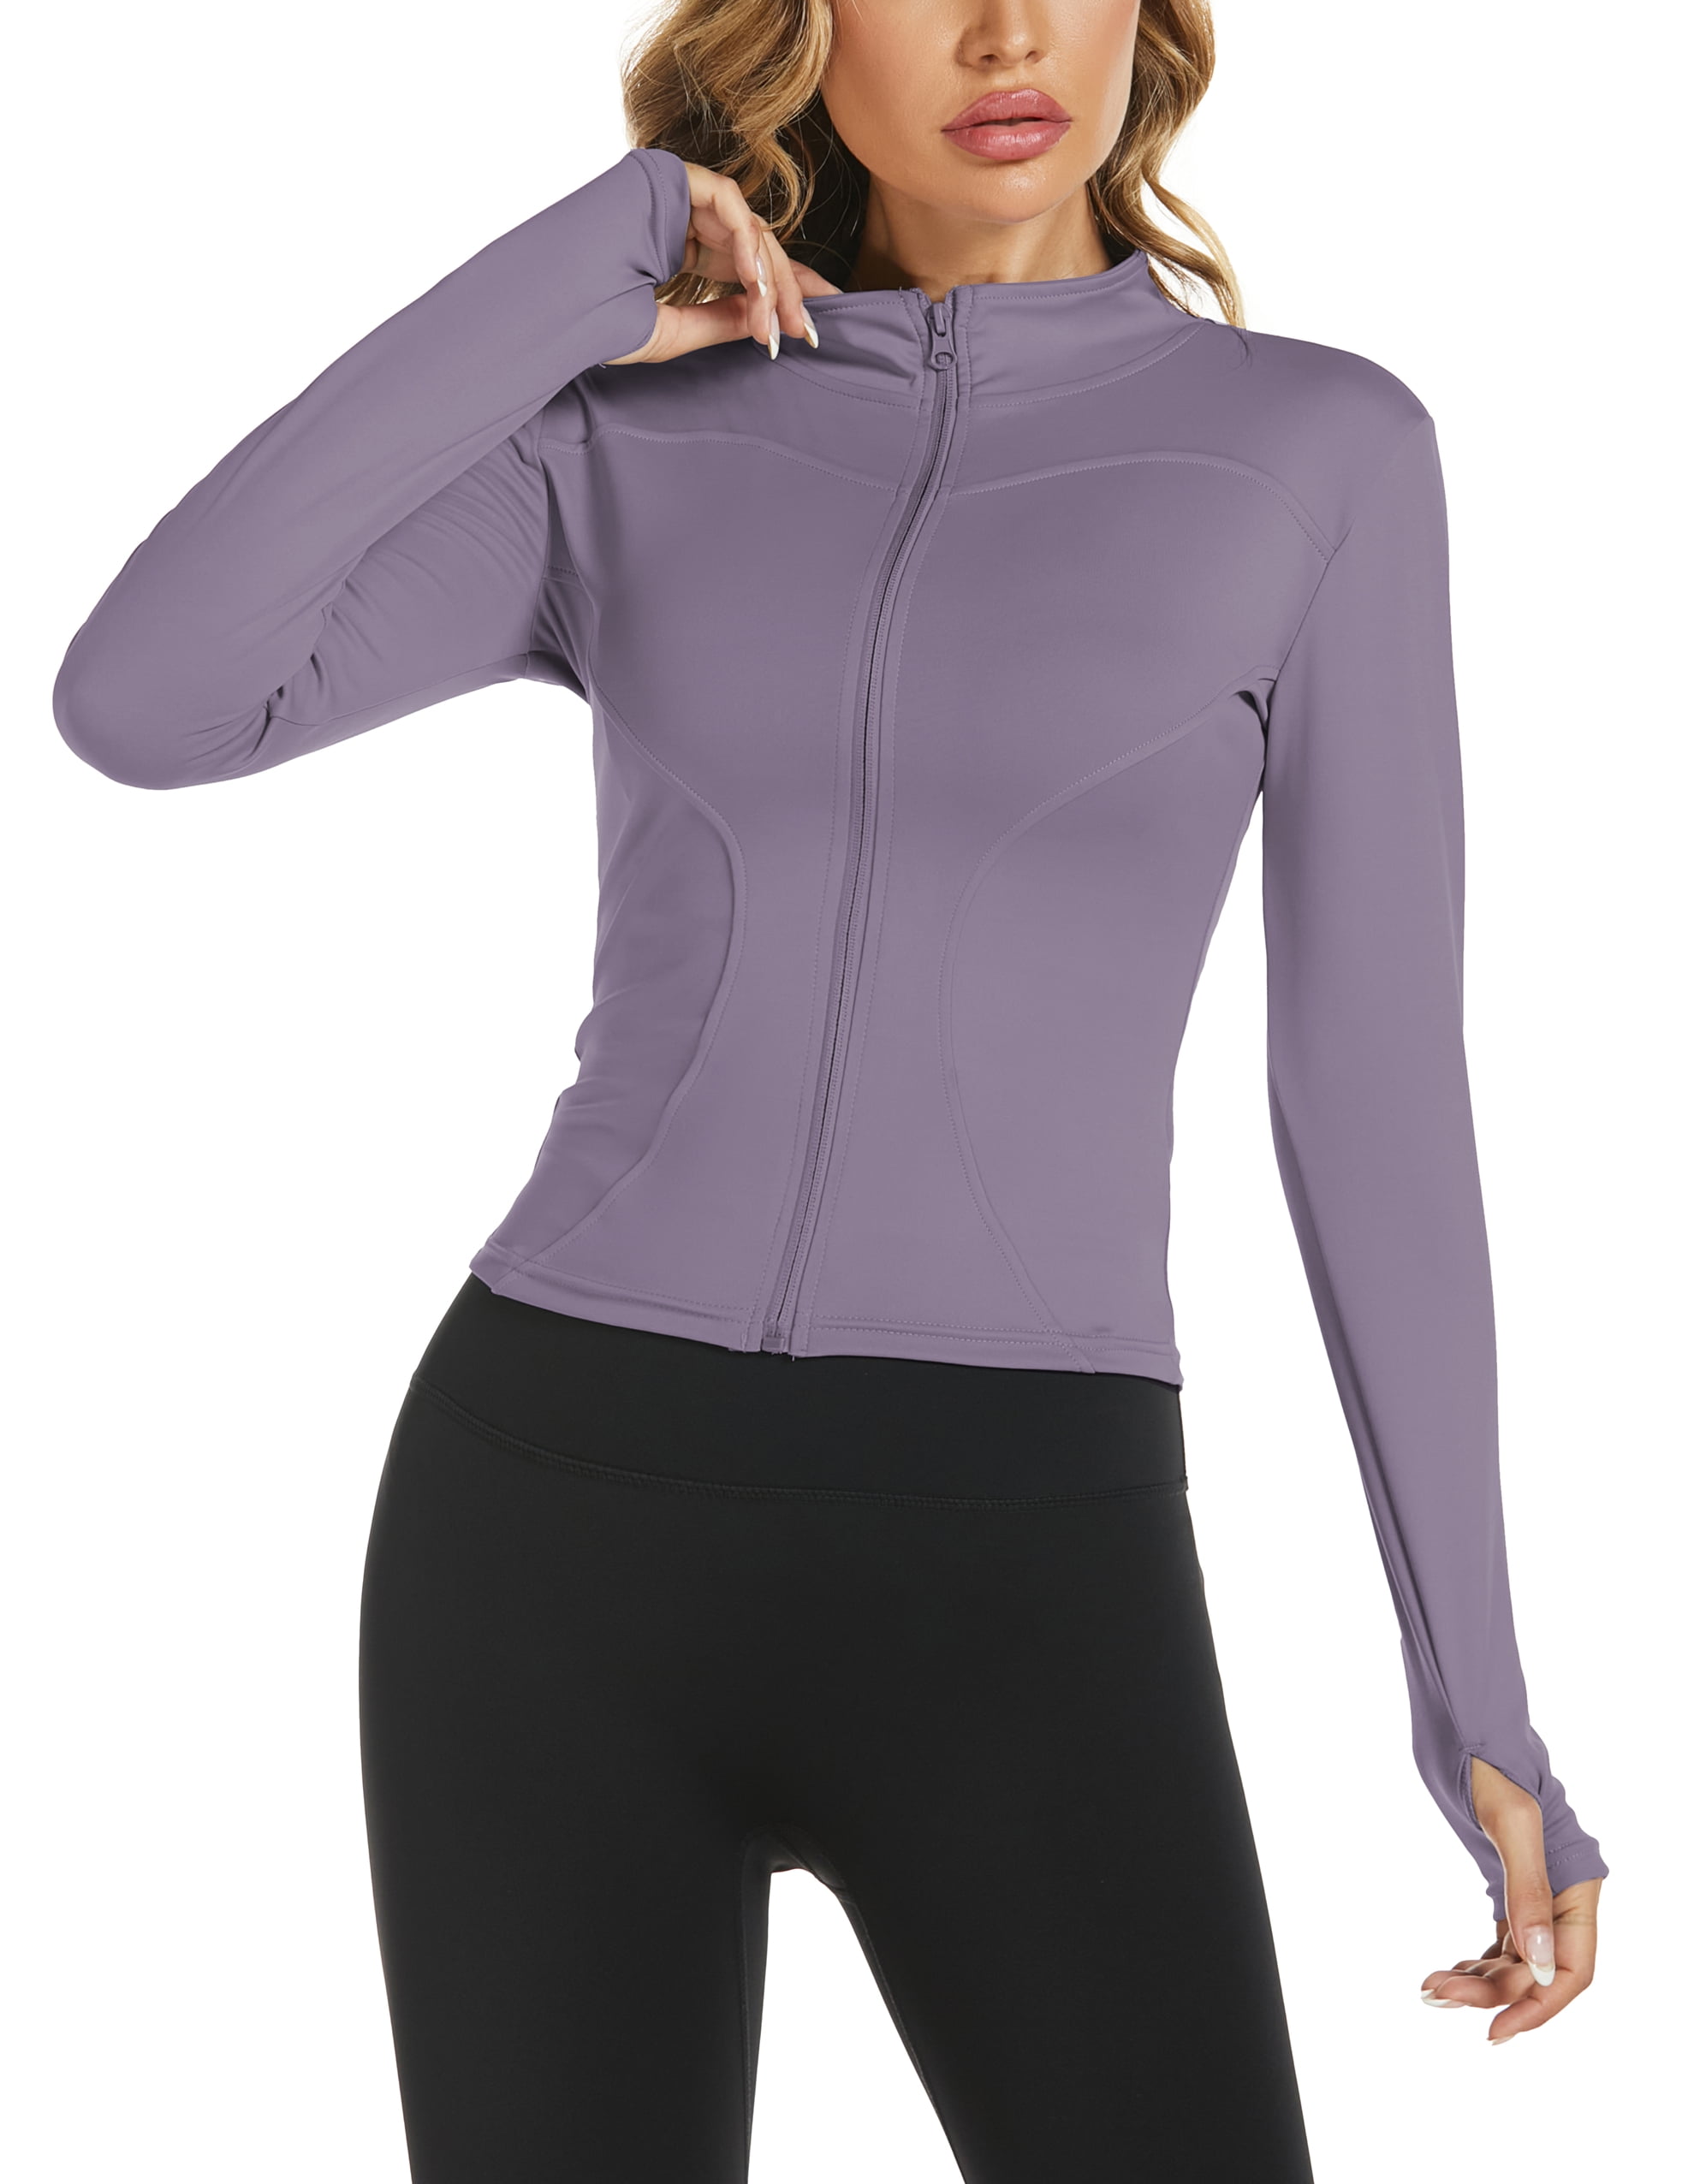 UANEO Workout Tops for Women Cropped Workout Jackets for Women Yoga Athletic Jacket